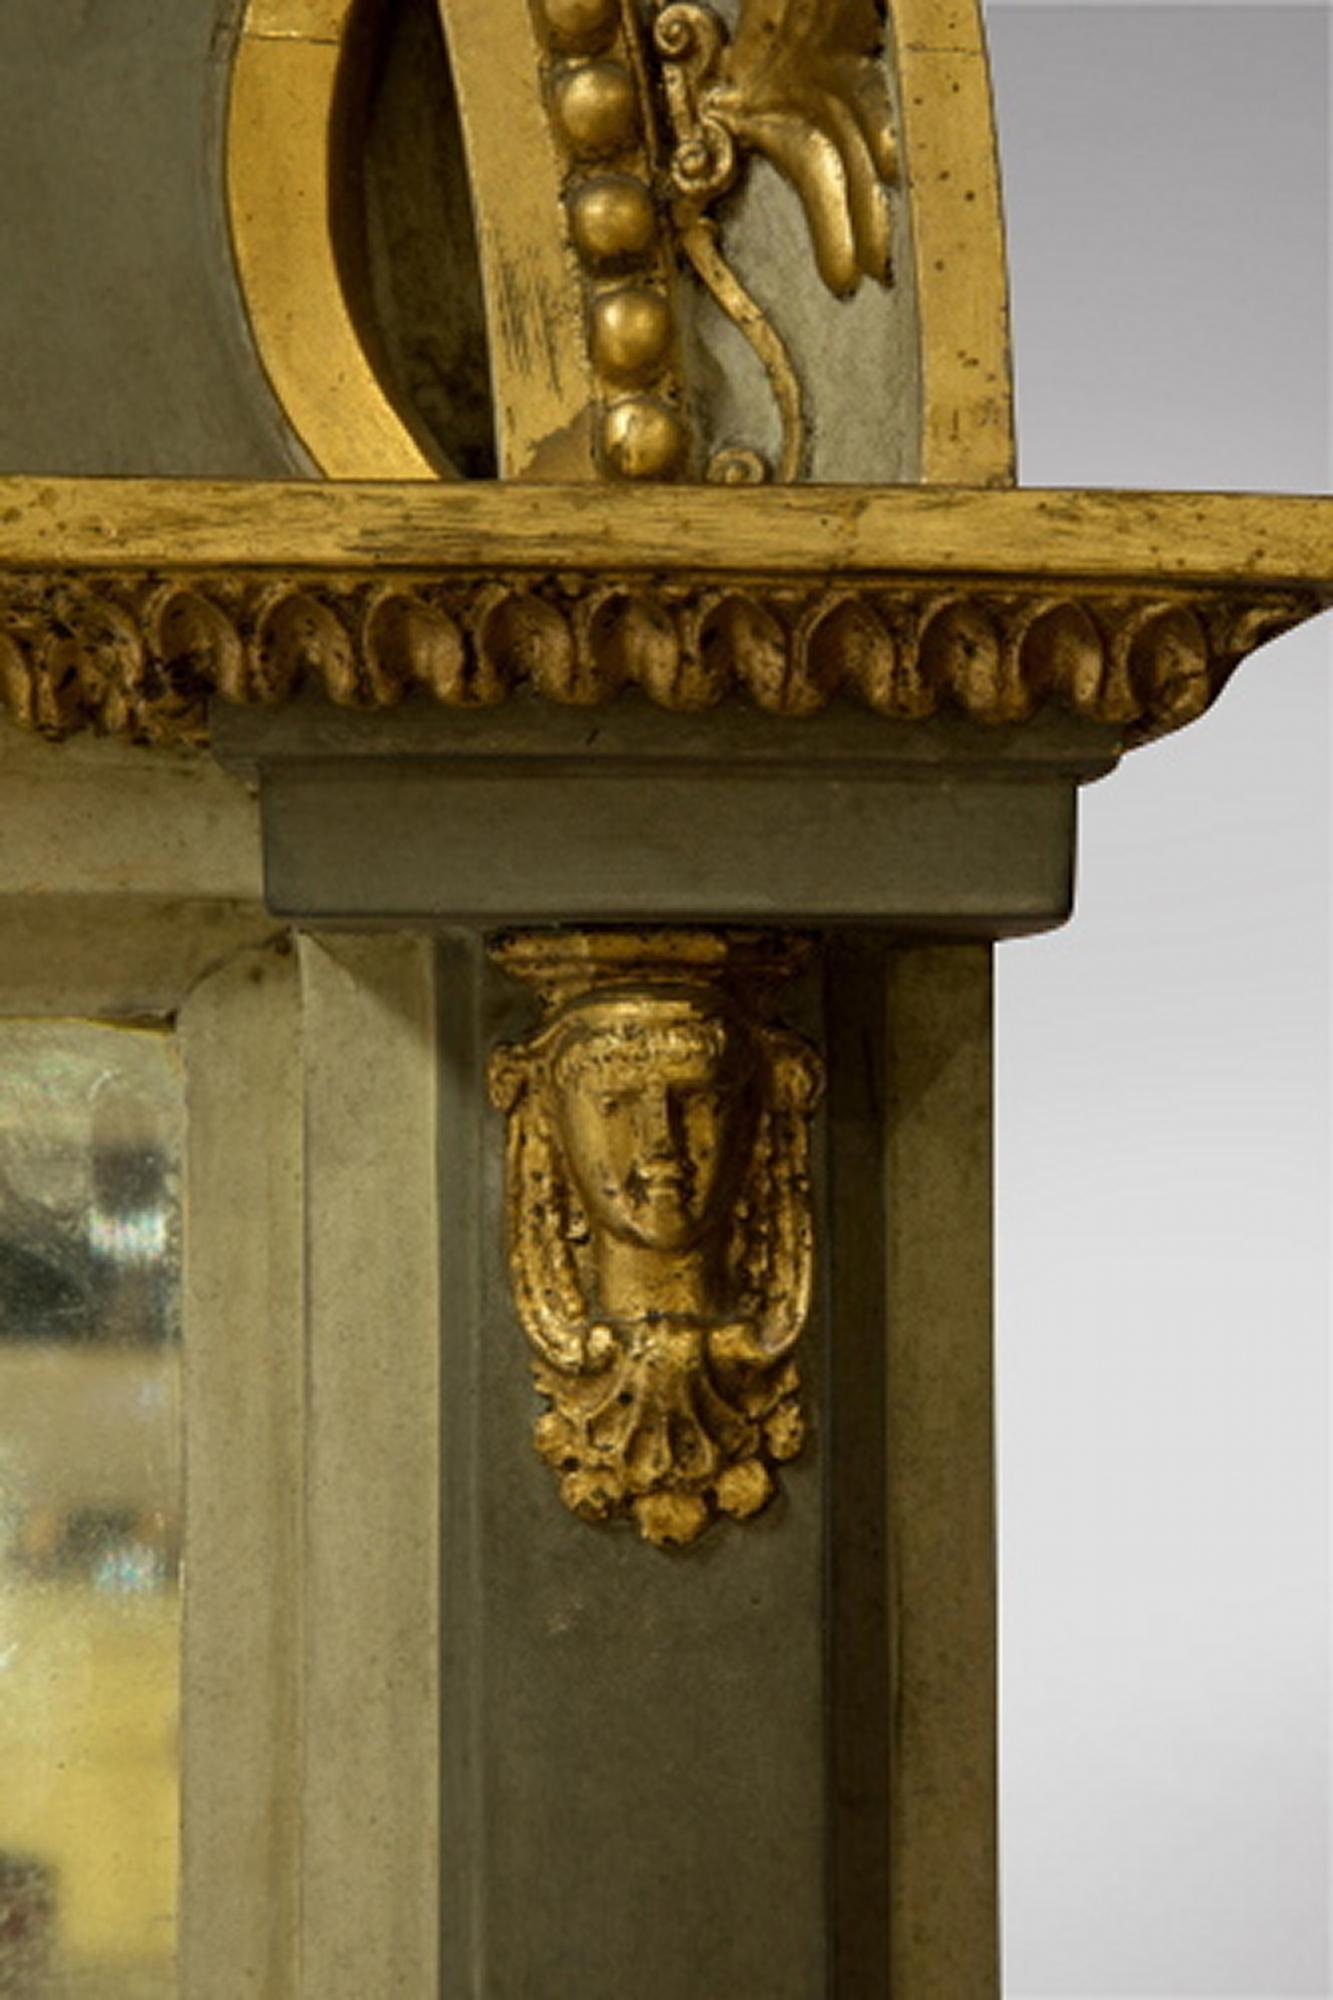 A Decorative Swedish Gustavian Pier Mirror 19thc, with embossed gilt face surrounded by gilt relief embellishment reminiscent of the Sun God Louis XIV. The mirror is consistent with age.